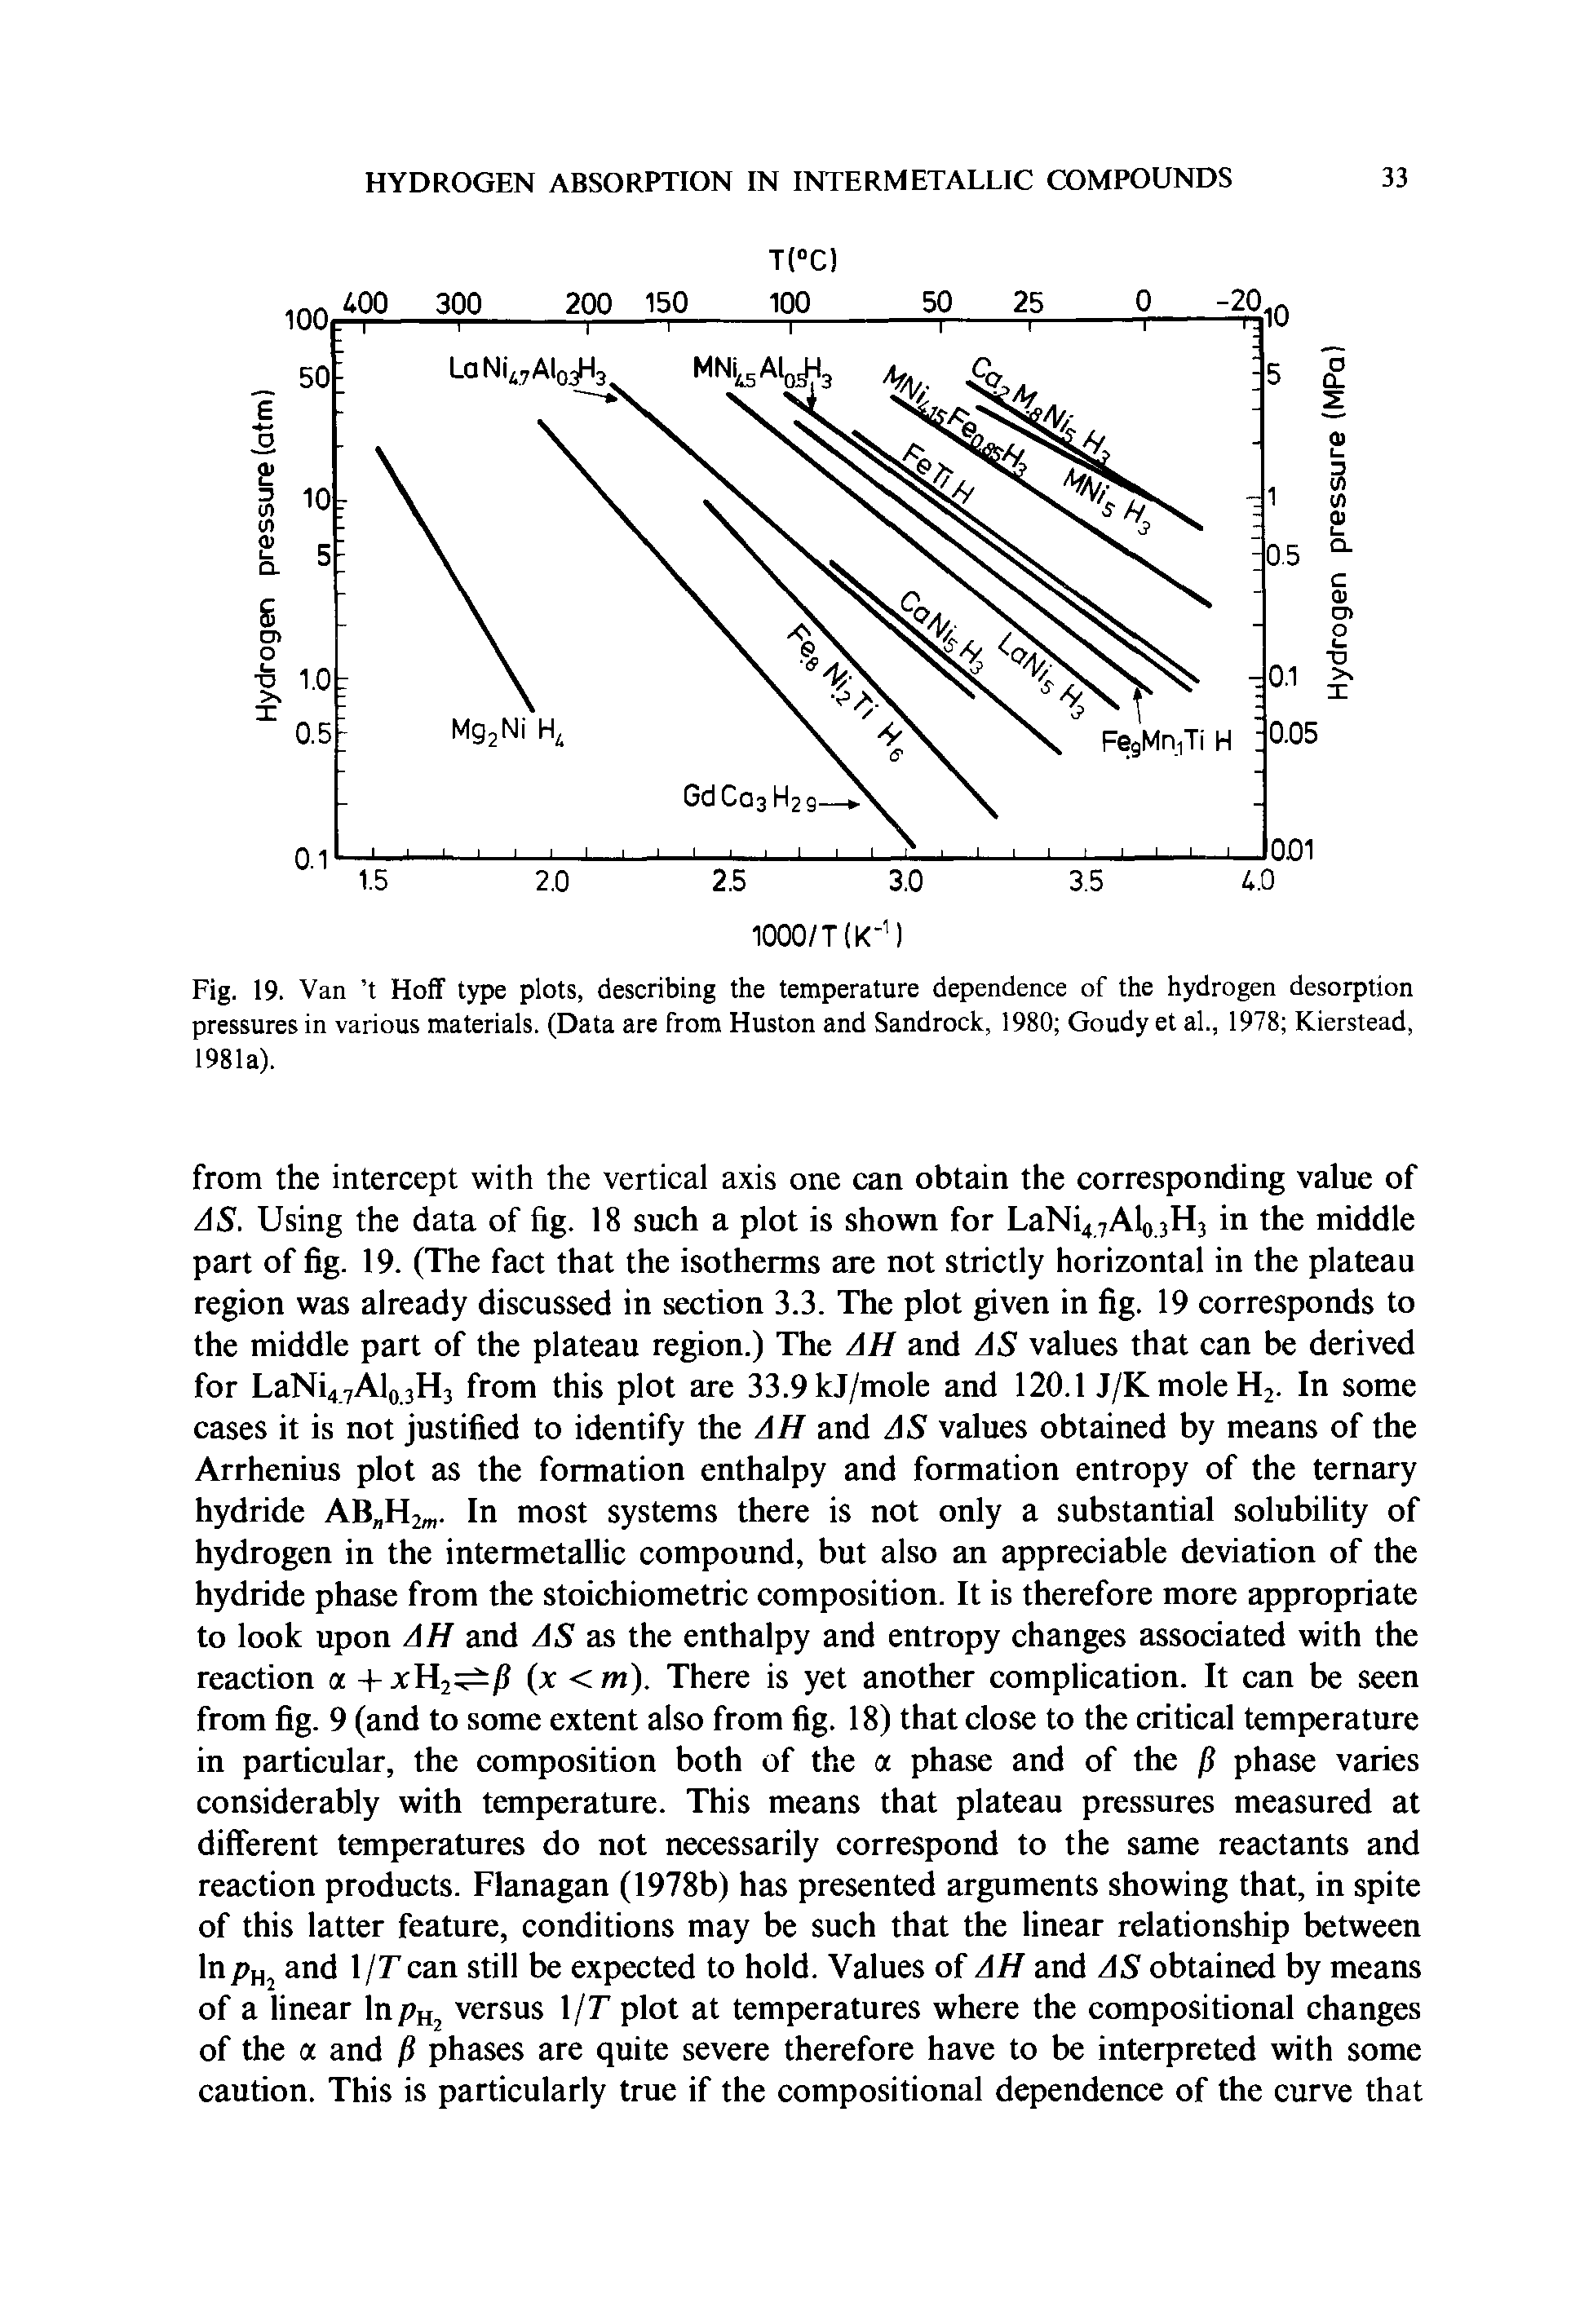 Fig. 19. Van t Hoff type plots, describing the temperature dependence of the hydrogen desorption pressures in various materials. (Data are from Huston and Sandrock, 1980 Goudy et al., 1978 Kierstead, 1981a).